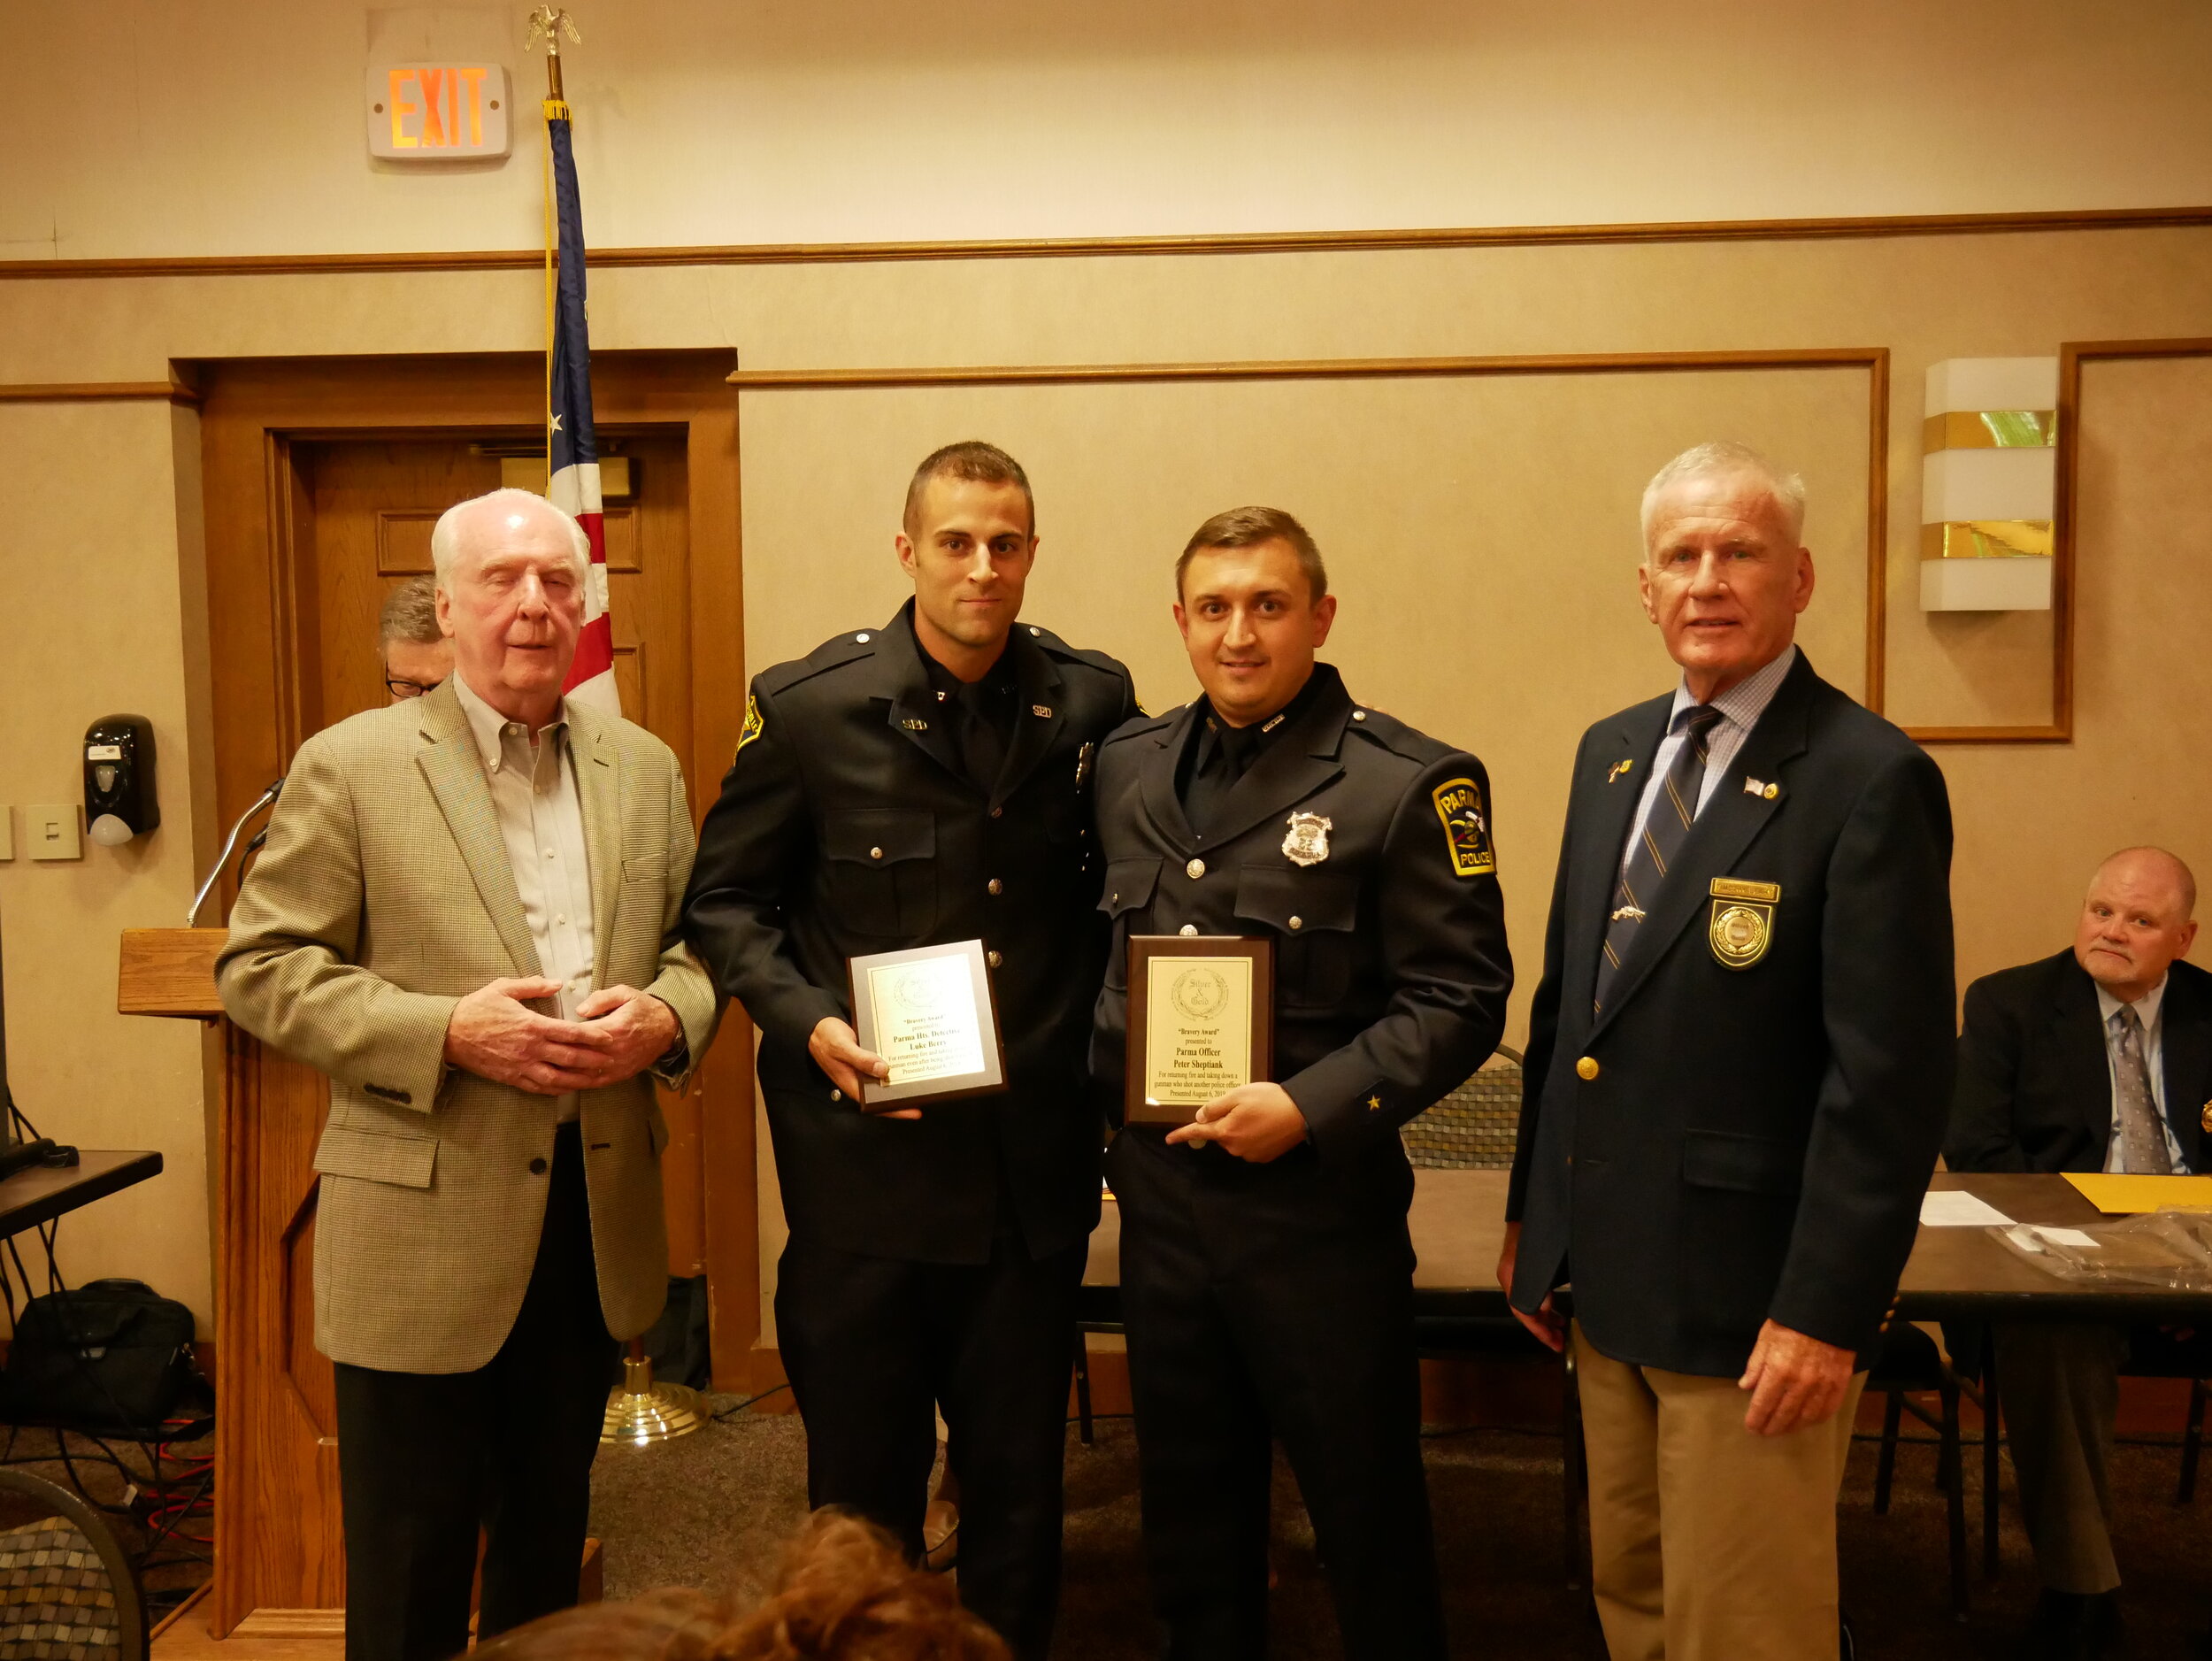  Parma Officers Luke Berry and Peter Sheptiank received the Bravery Award for returning fire and taking down a gunman who shot another police officer (Berry). 